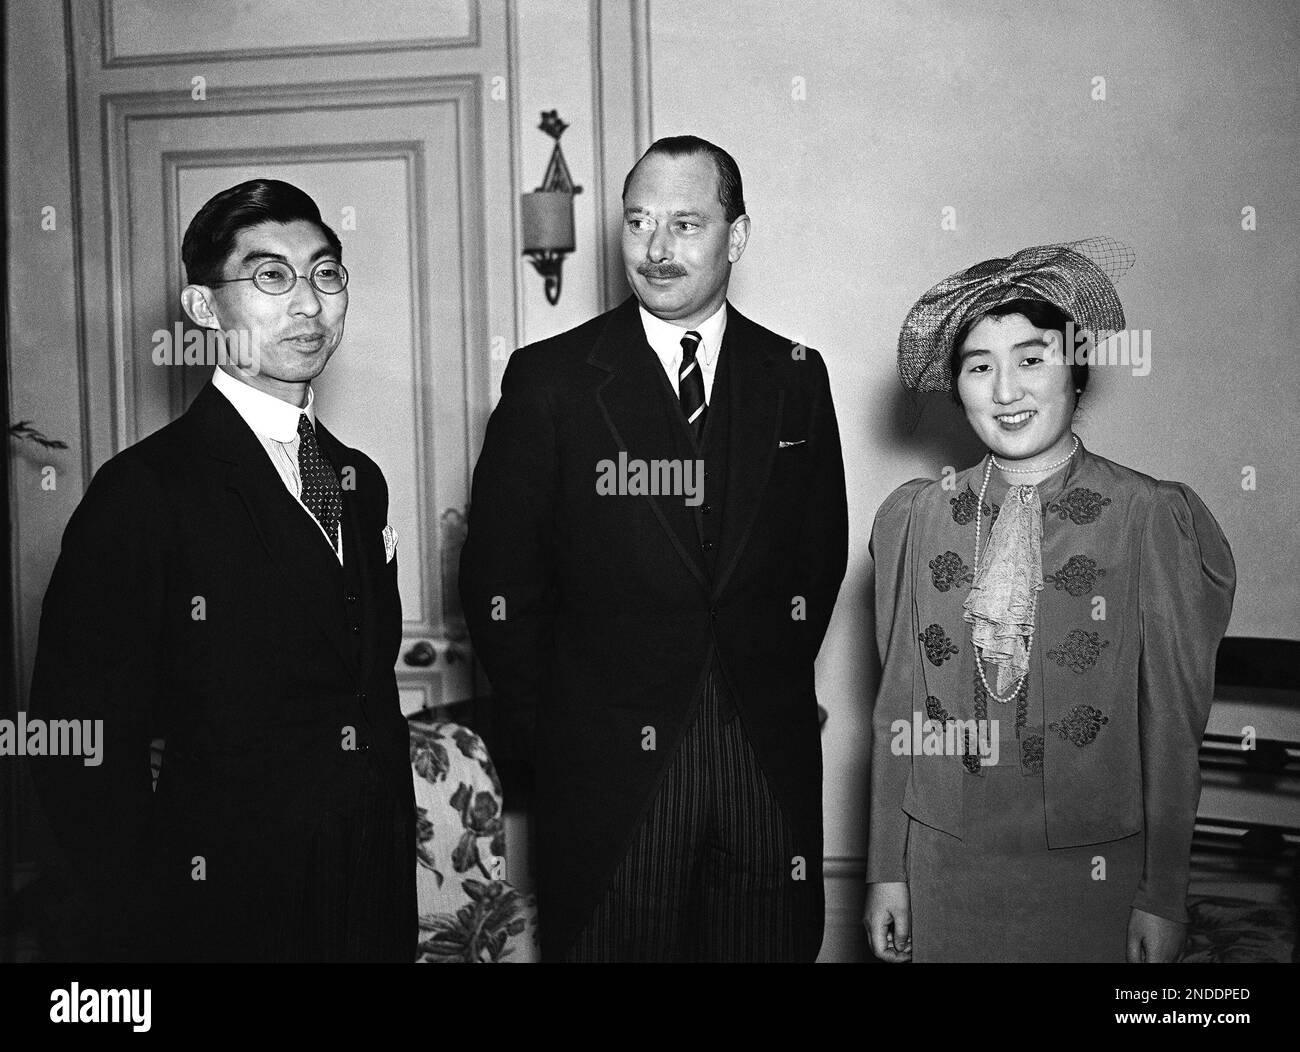 Britain's Prince Henry, the Duke of Gloucester, center, with the Yasuhito, Prince Chichibu of Japan and wife Setsuko, Princess Chichibu at a London Hotel on April 13, 1937. The Japanese royals are over to represent Japan at the coronation celebrations. (AP Photo/Staff/Len Puttnam) Stock Photo